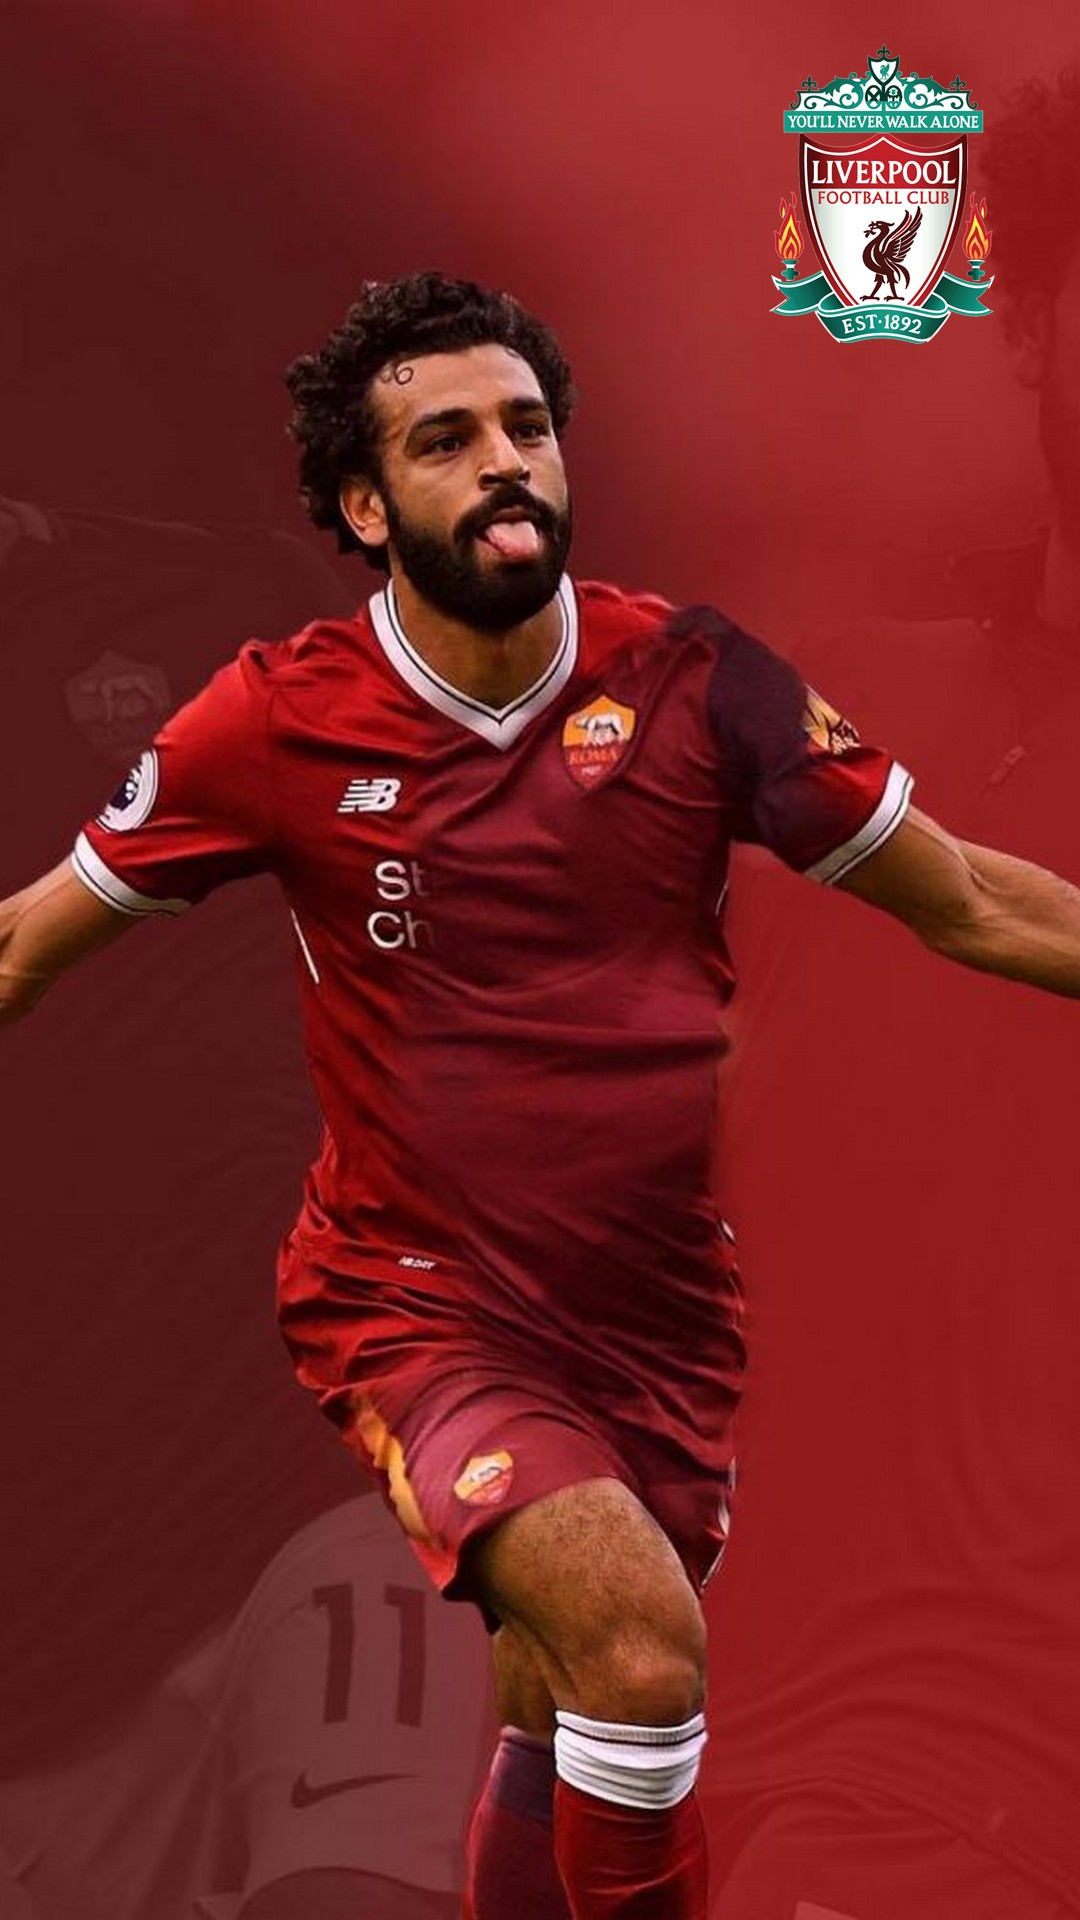 Mohamed Salah Liverpool HD Wallpapers For Android with image resolution 1080x1920 pixel. You can make this wallpaper for your Android backgrounds, Tablet, Smartphones Screensavers and Mobile Phone Lock Screen